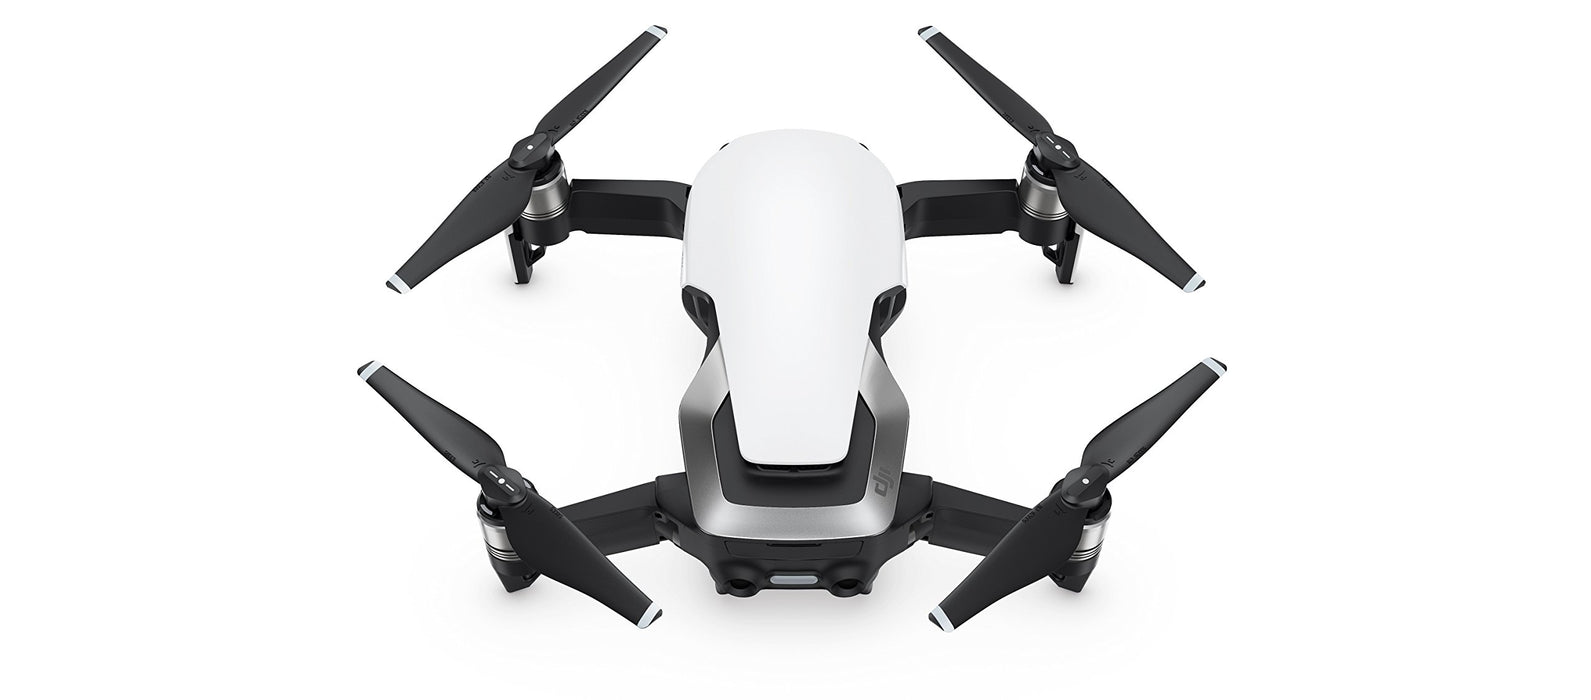 DJI Mavic Air Drone Fly More Combo - UK Version With UK PSU, 3-Axis Gimbal and 4K Camera, 21-Minute Flight Time, 32 MP Sphere Panoramas, Foldable and Portable, SmartCapture - Arctic White